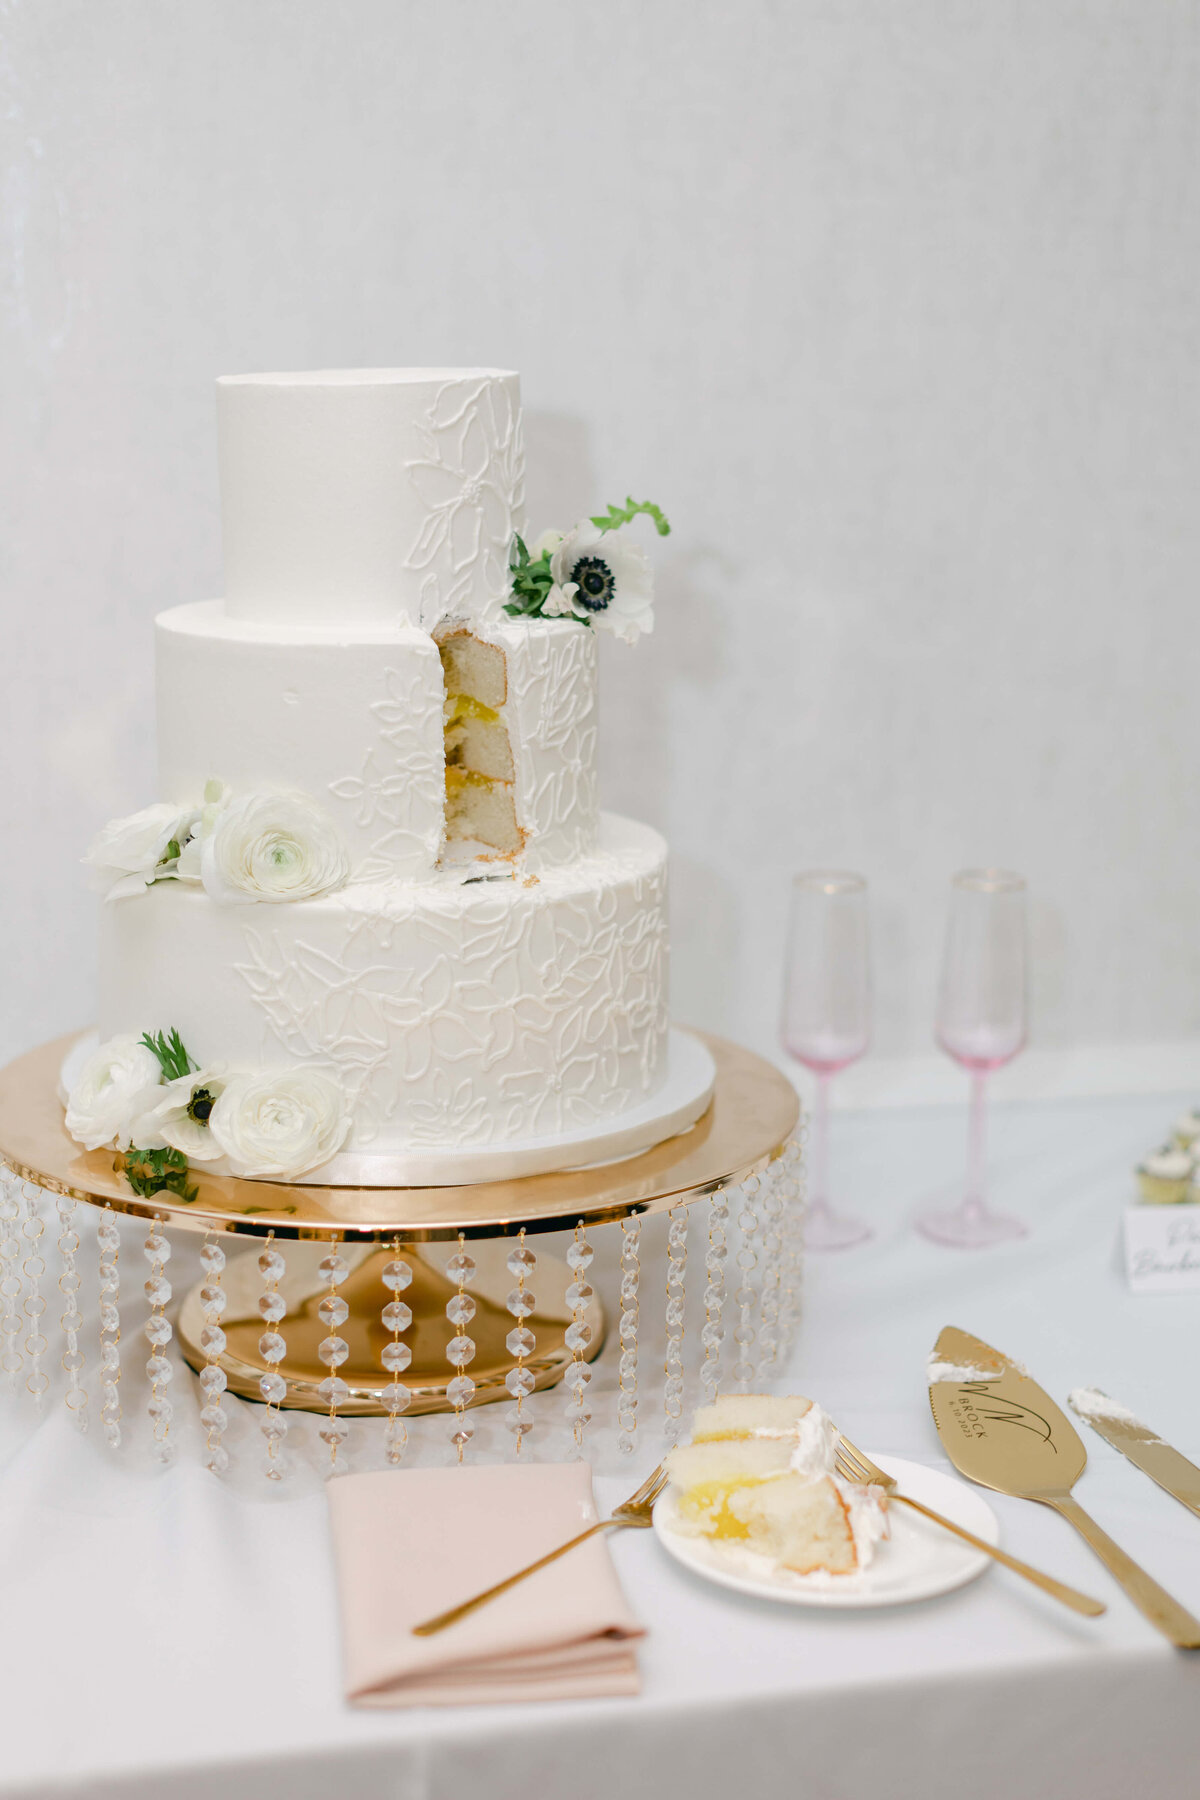 A cake sits on a golden platter with a piece cut out of it.